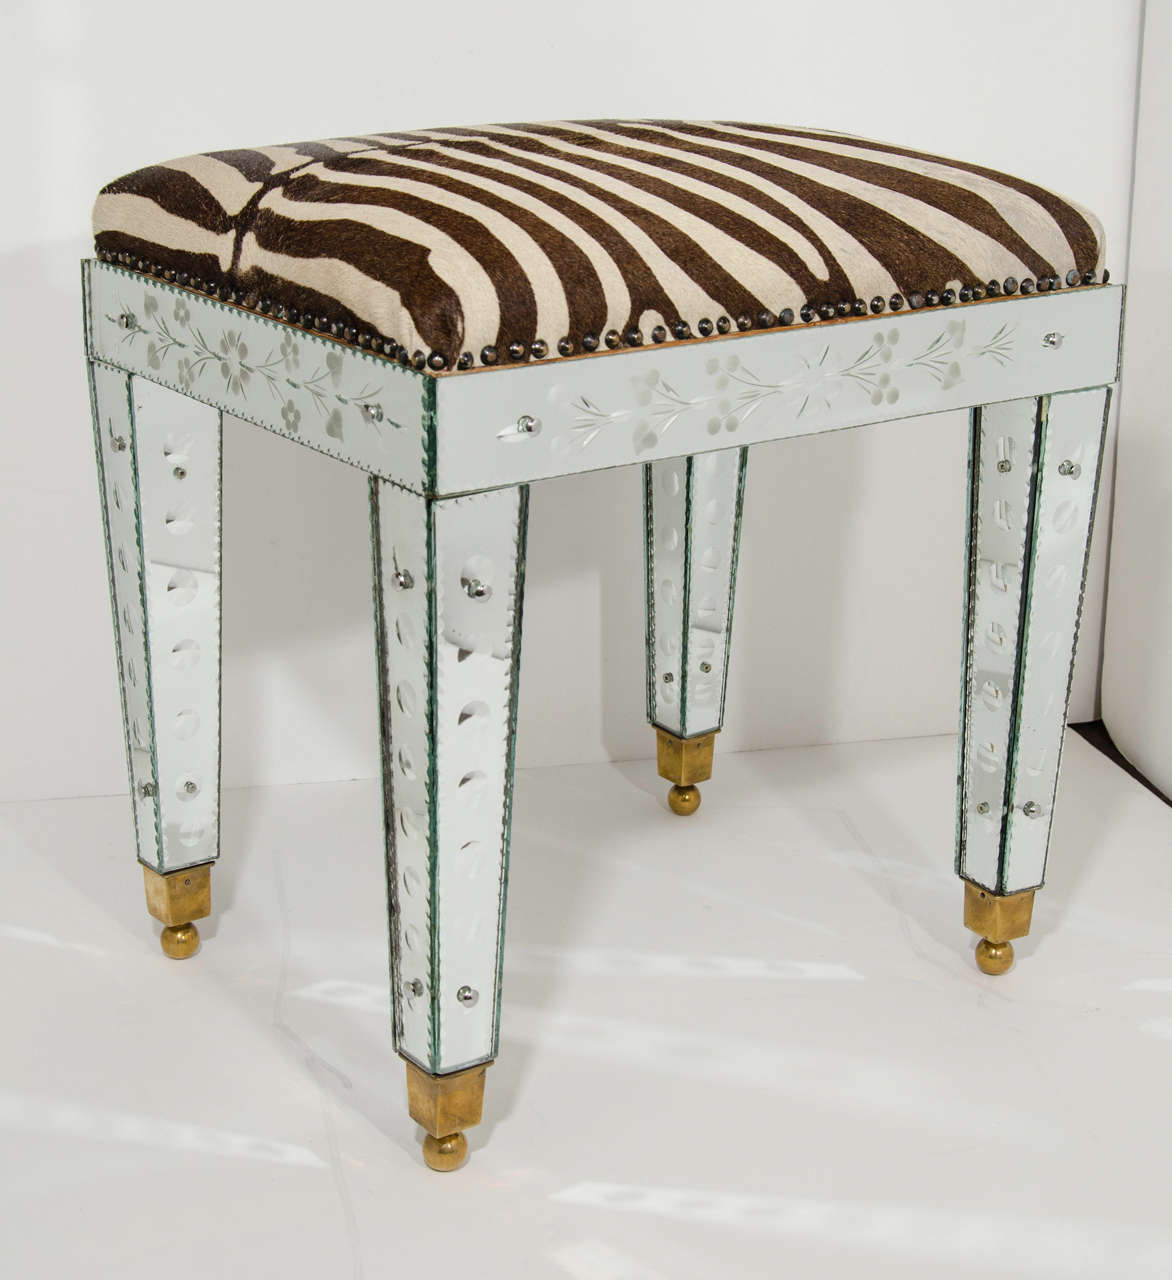 Elegant bench comprised of Venetian mirrored base and upholstered in exotic vintage zebra hide with antique brass stud details. Mirrored base is hand worked with reverse etched floral designs, and features convex circles.  The mirrored panels have